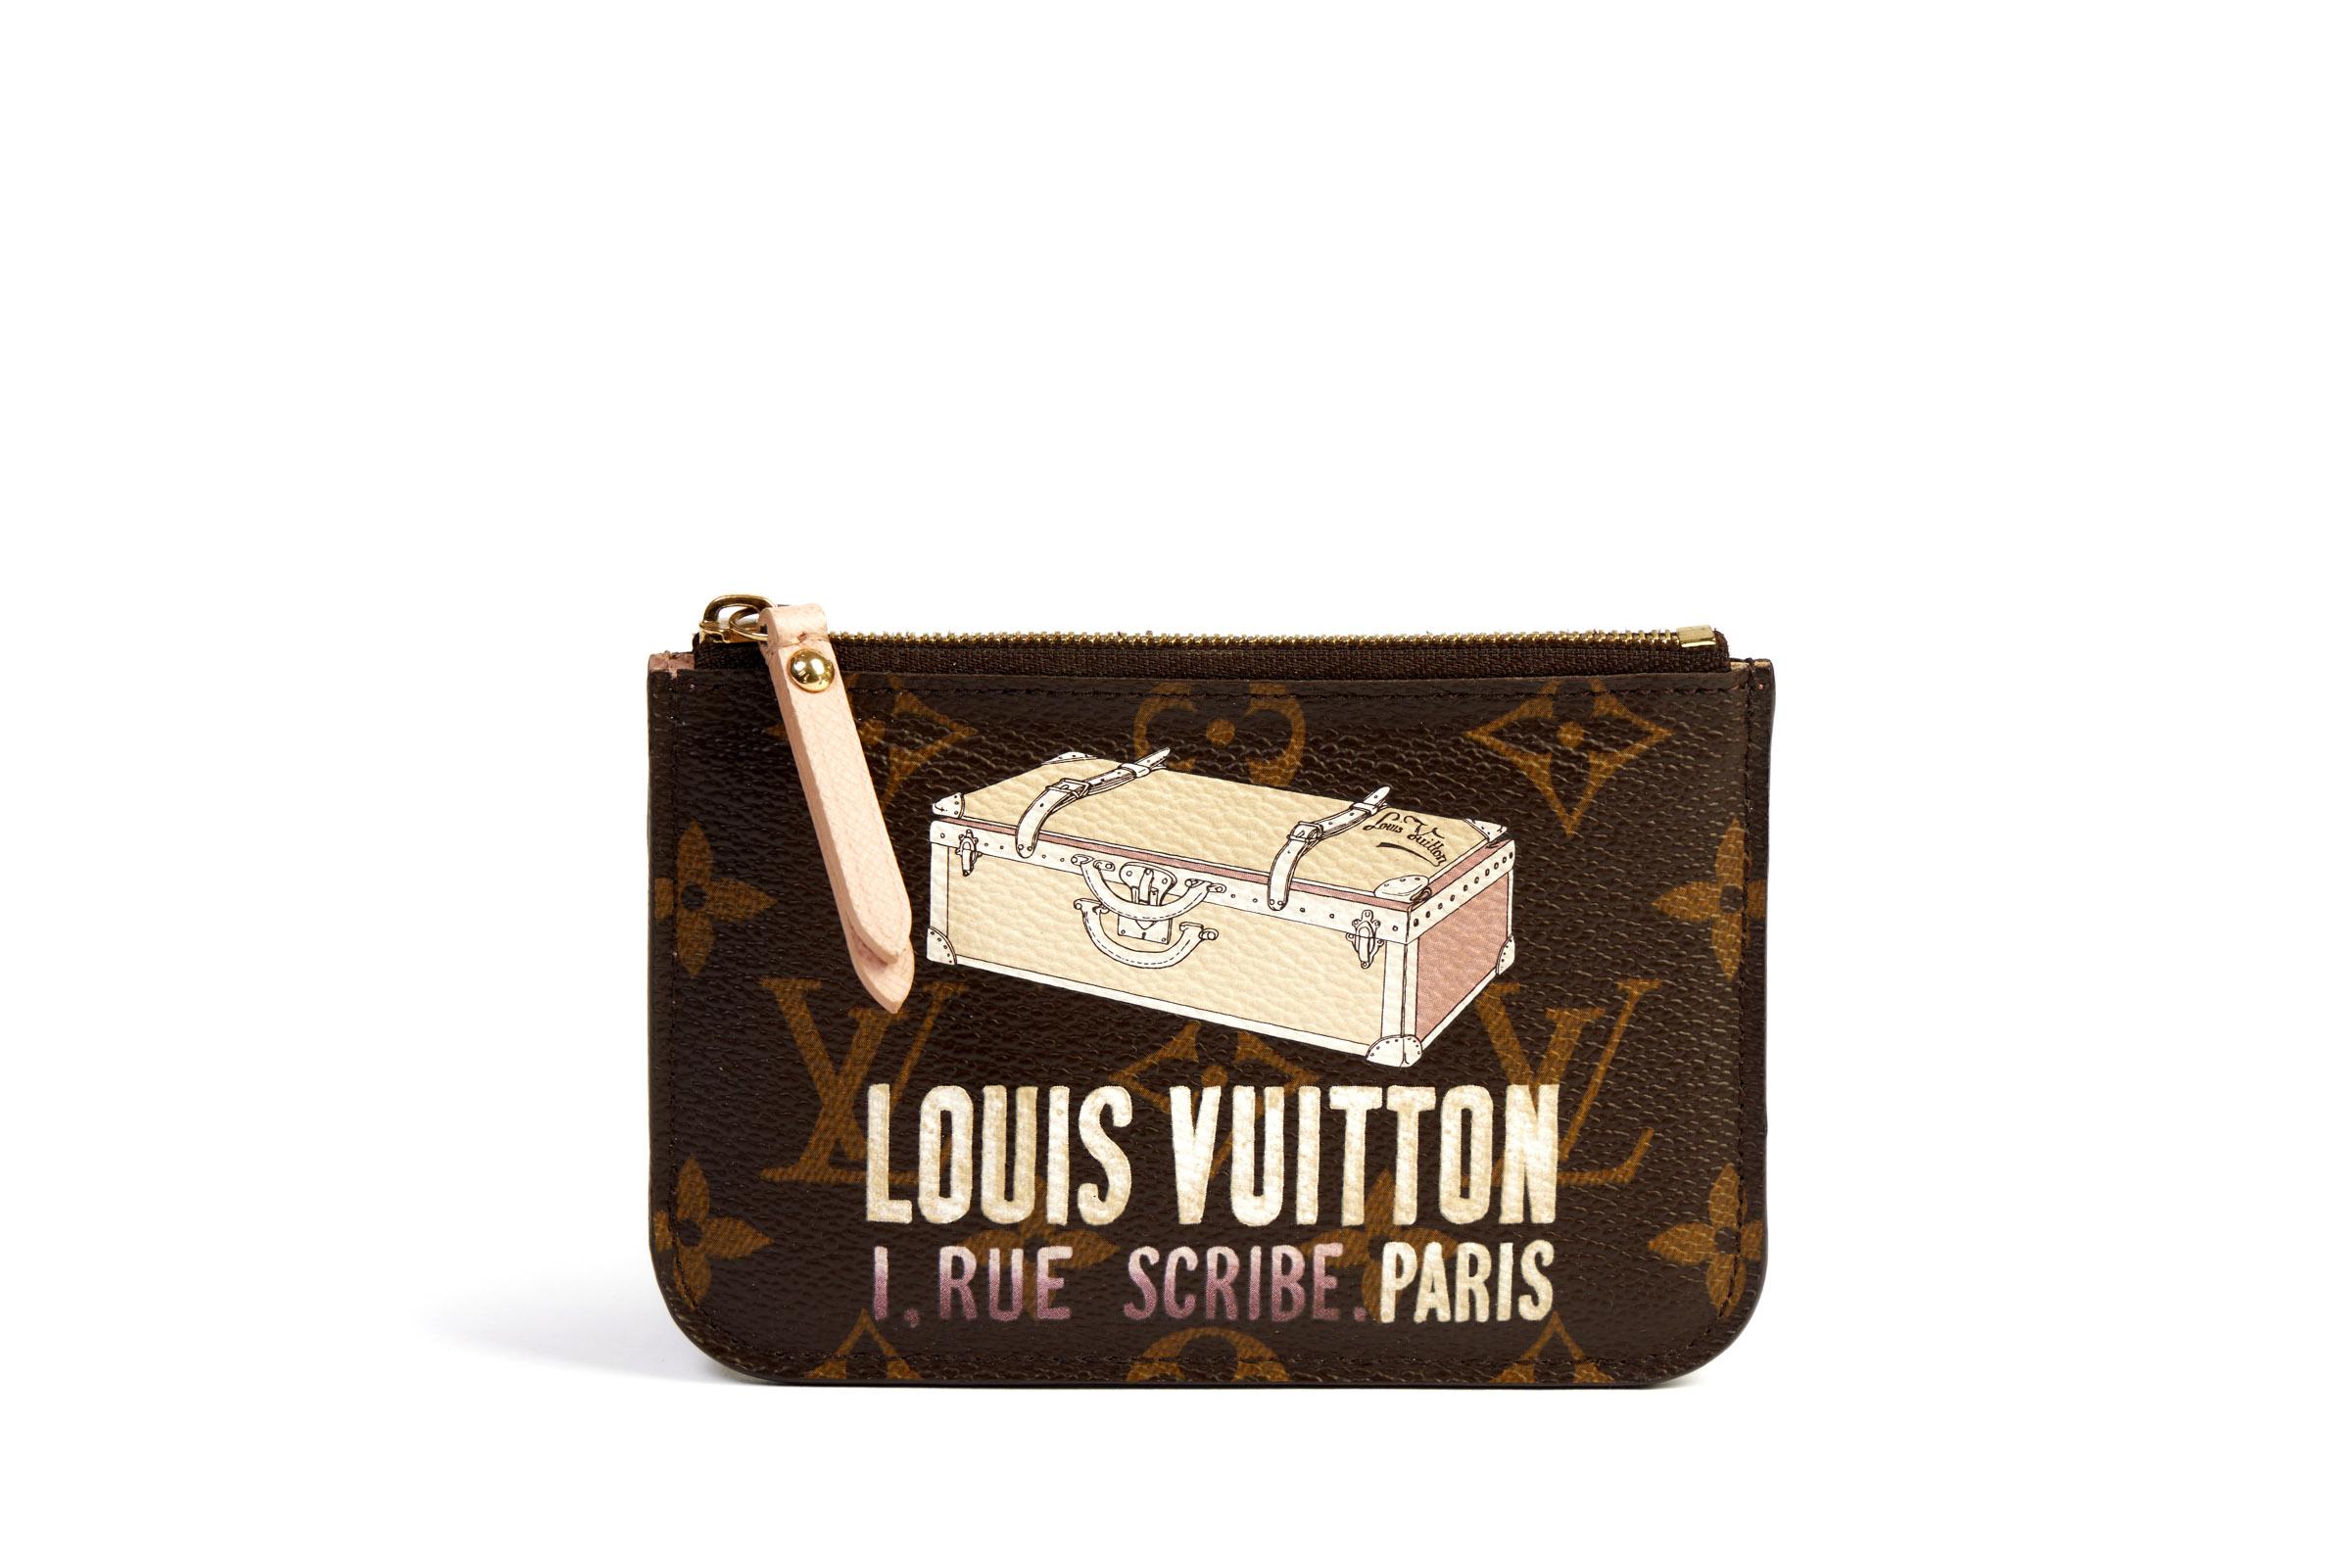 Louis Vuitton limited edition trunk keychain pochette. Back pocket and hidden chain. Monogram brown coated canvas and pink leather. Comes with original box.
